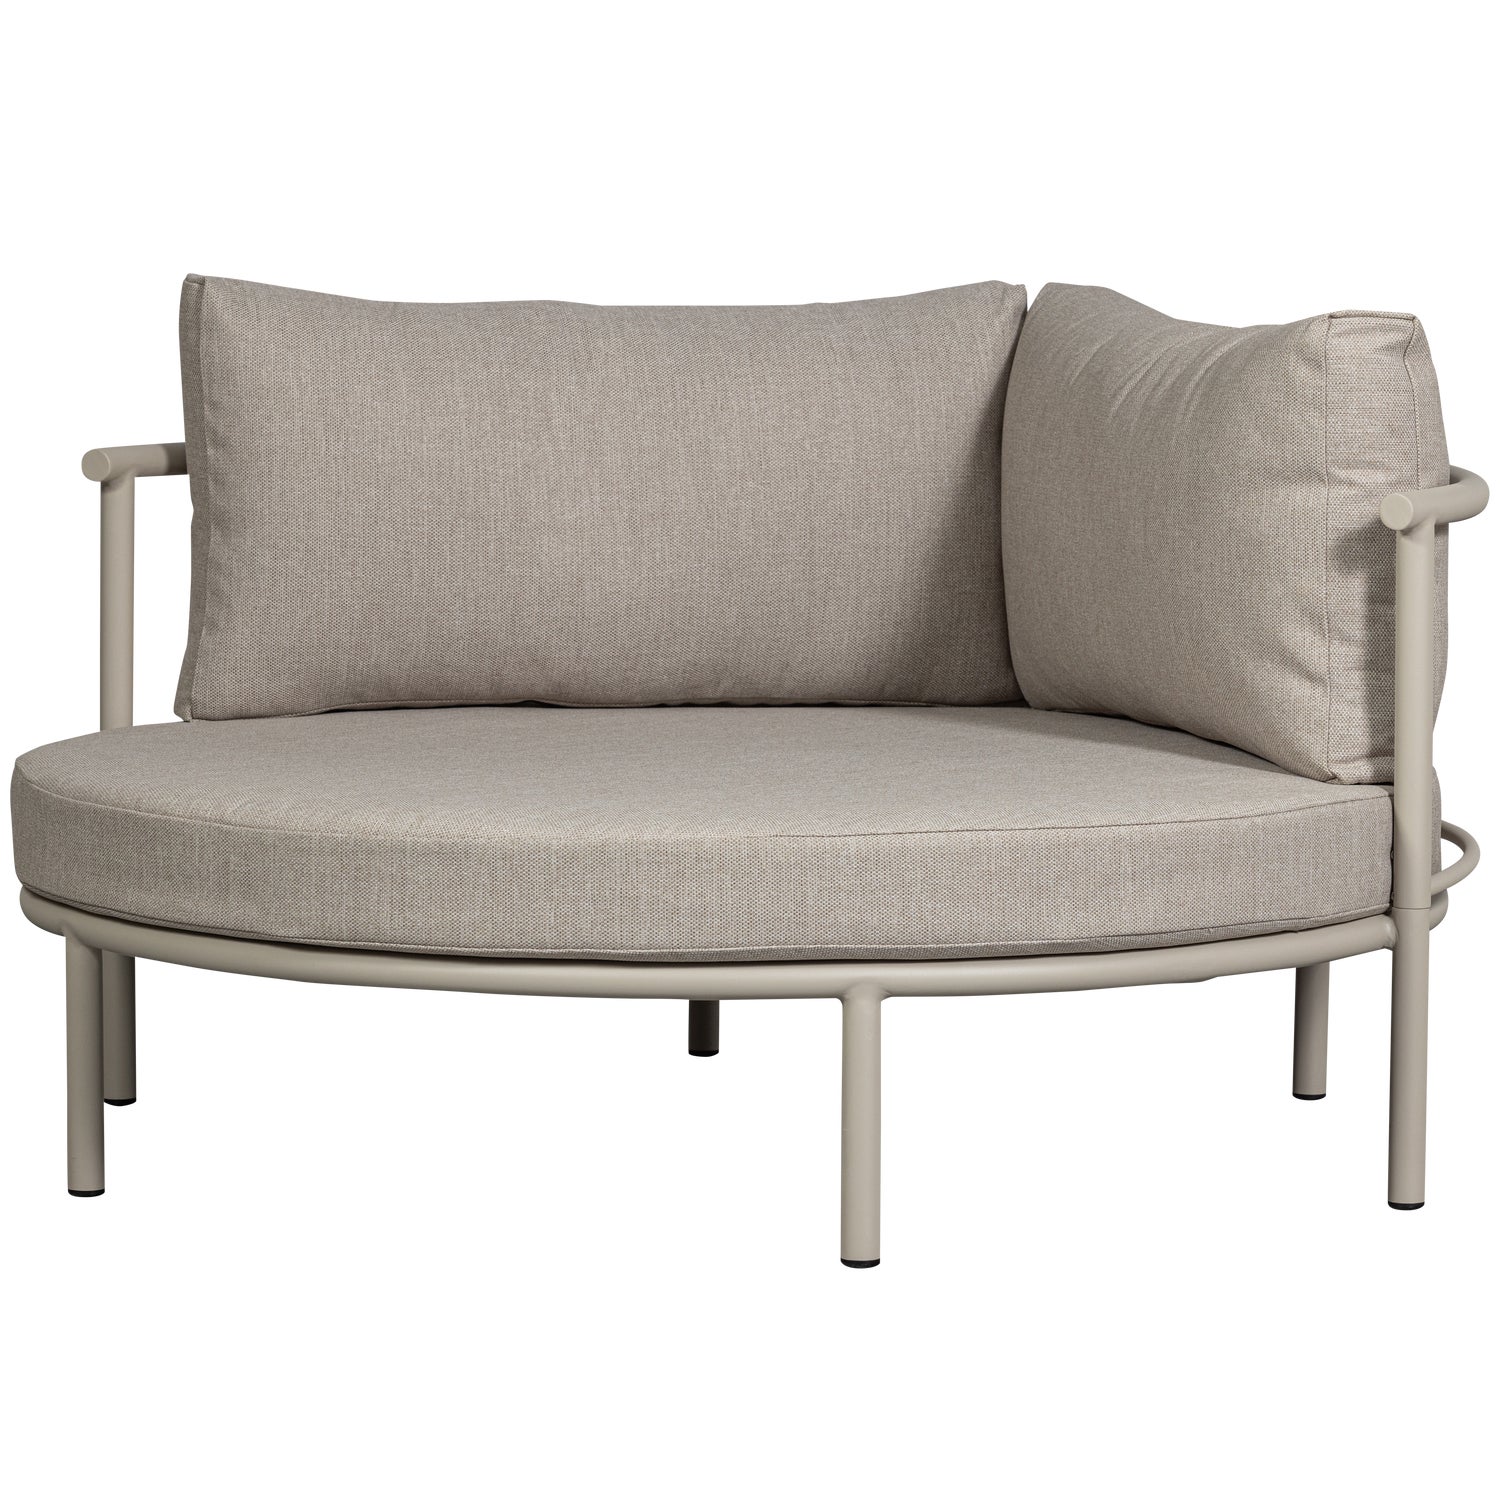 500015-Z-02_VS_EXT_Mulberry_rond_loungebed_aluminium_zand_SA.png?auto=webp&format=png&width=1500&height=1500